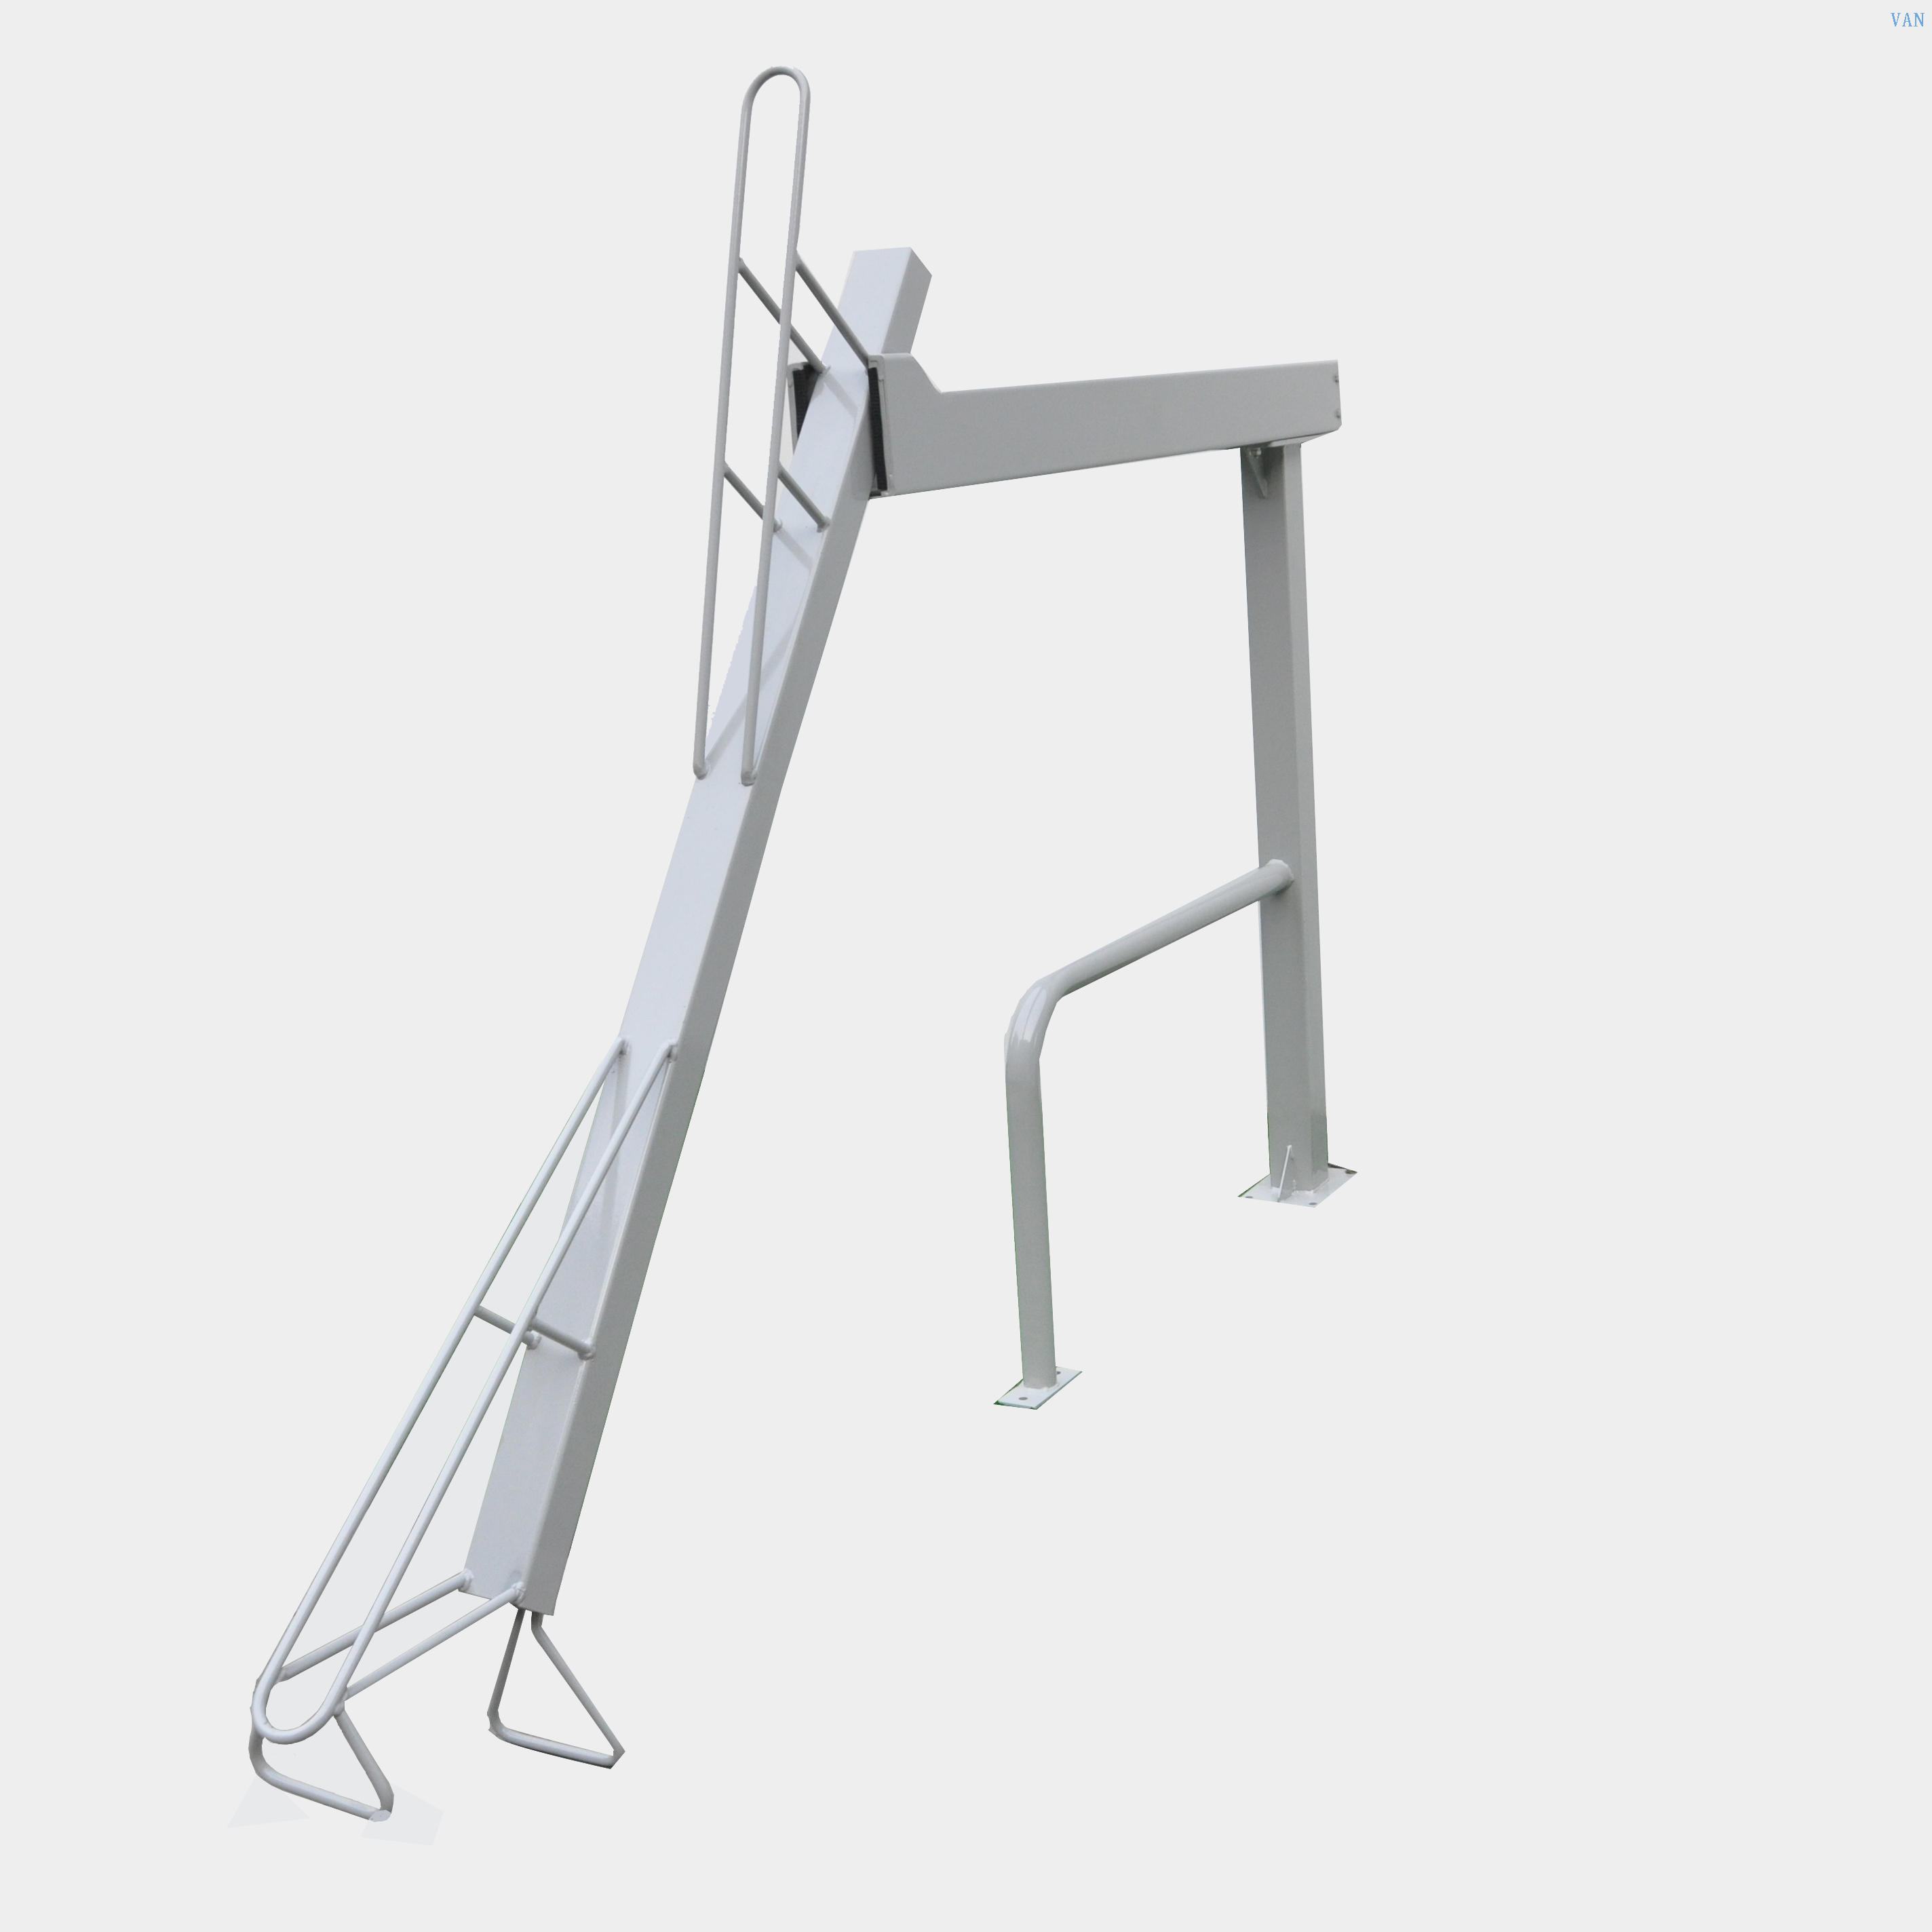 China Manufacturer Two Tier White Safety Metal Bike Stands for Sale